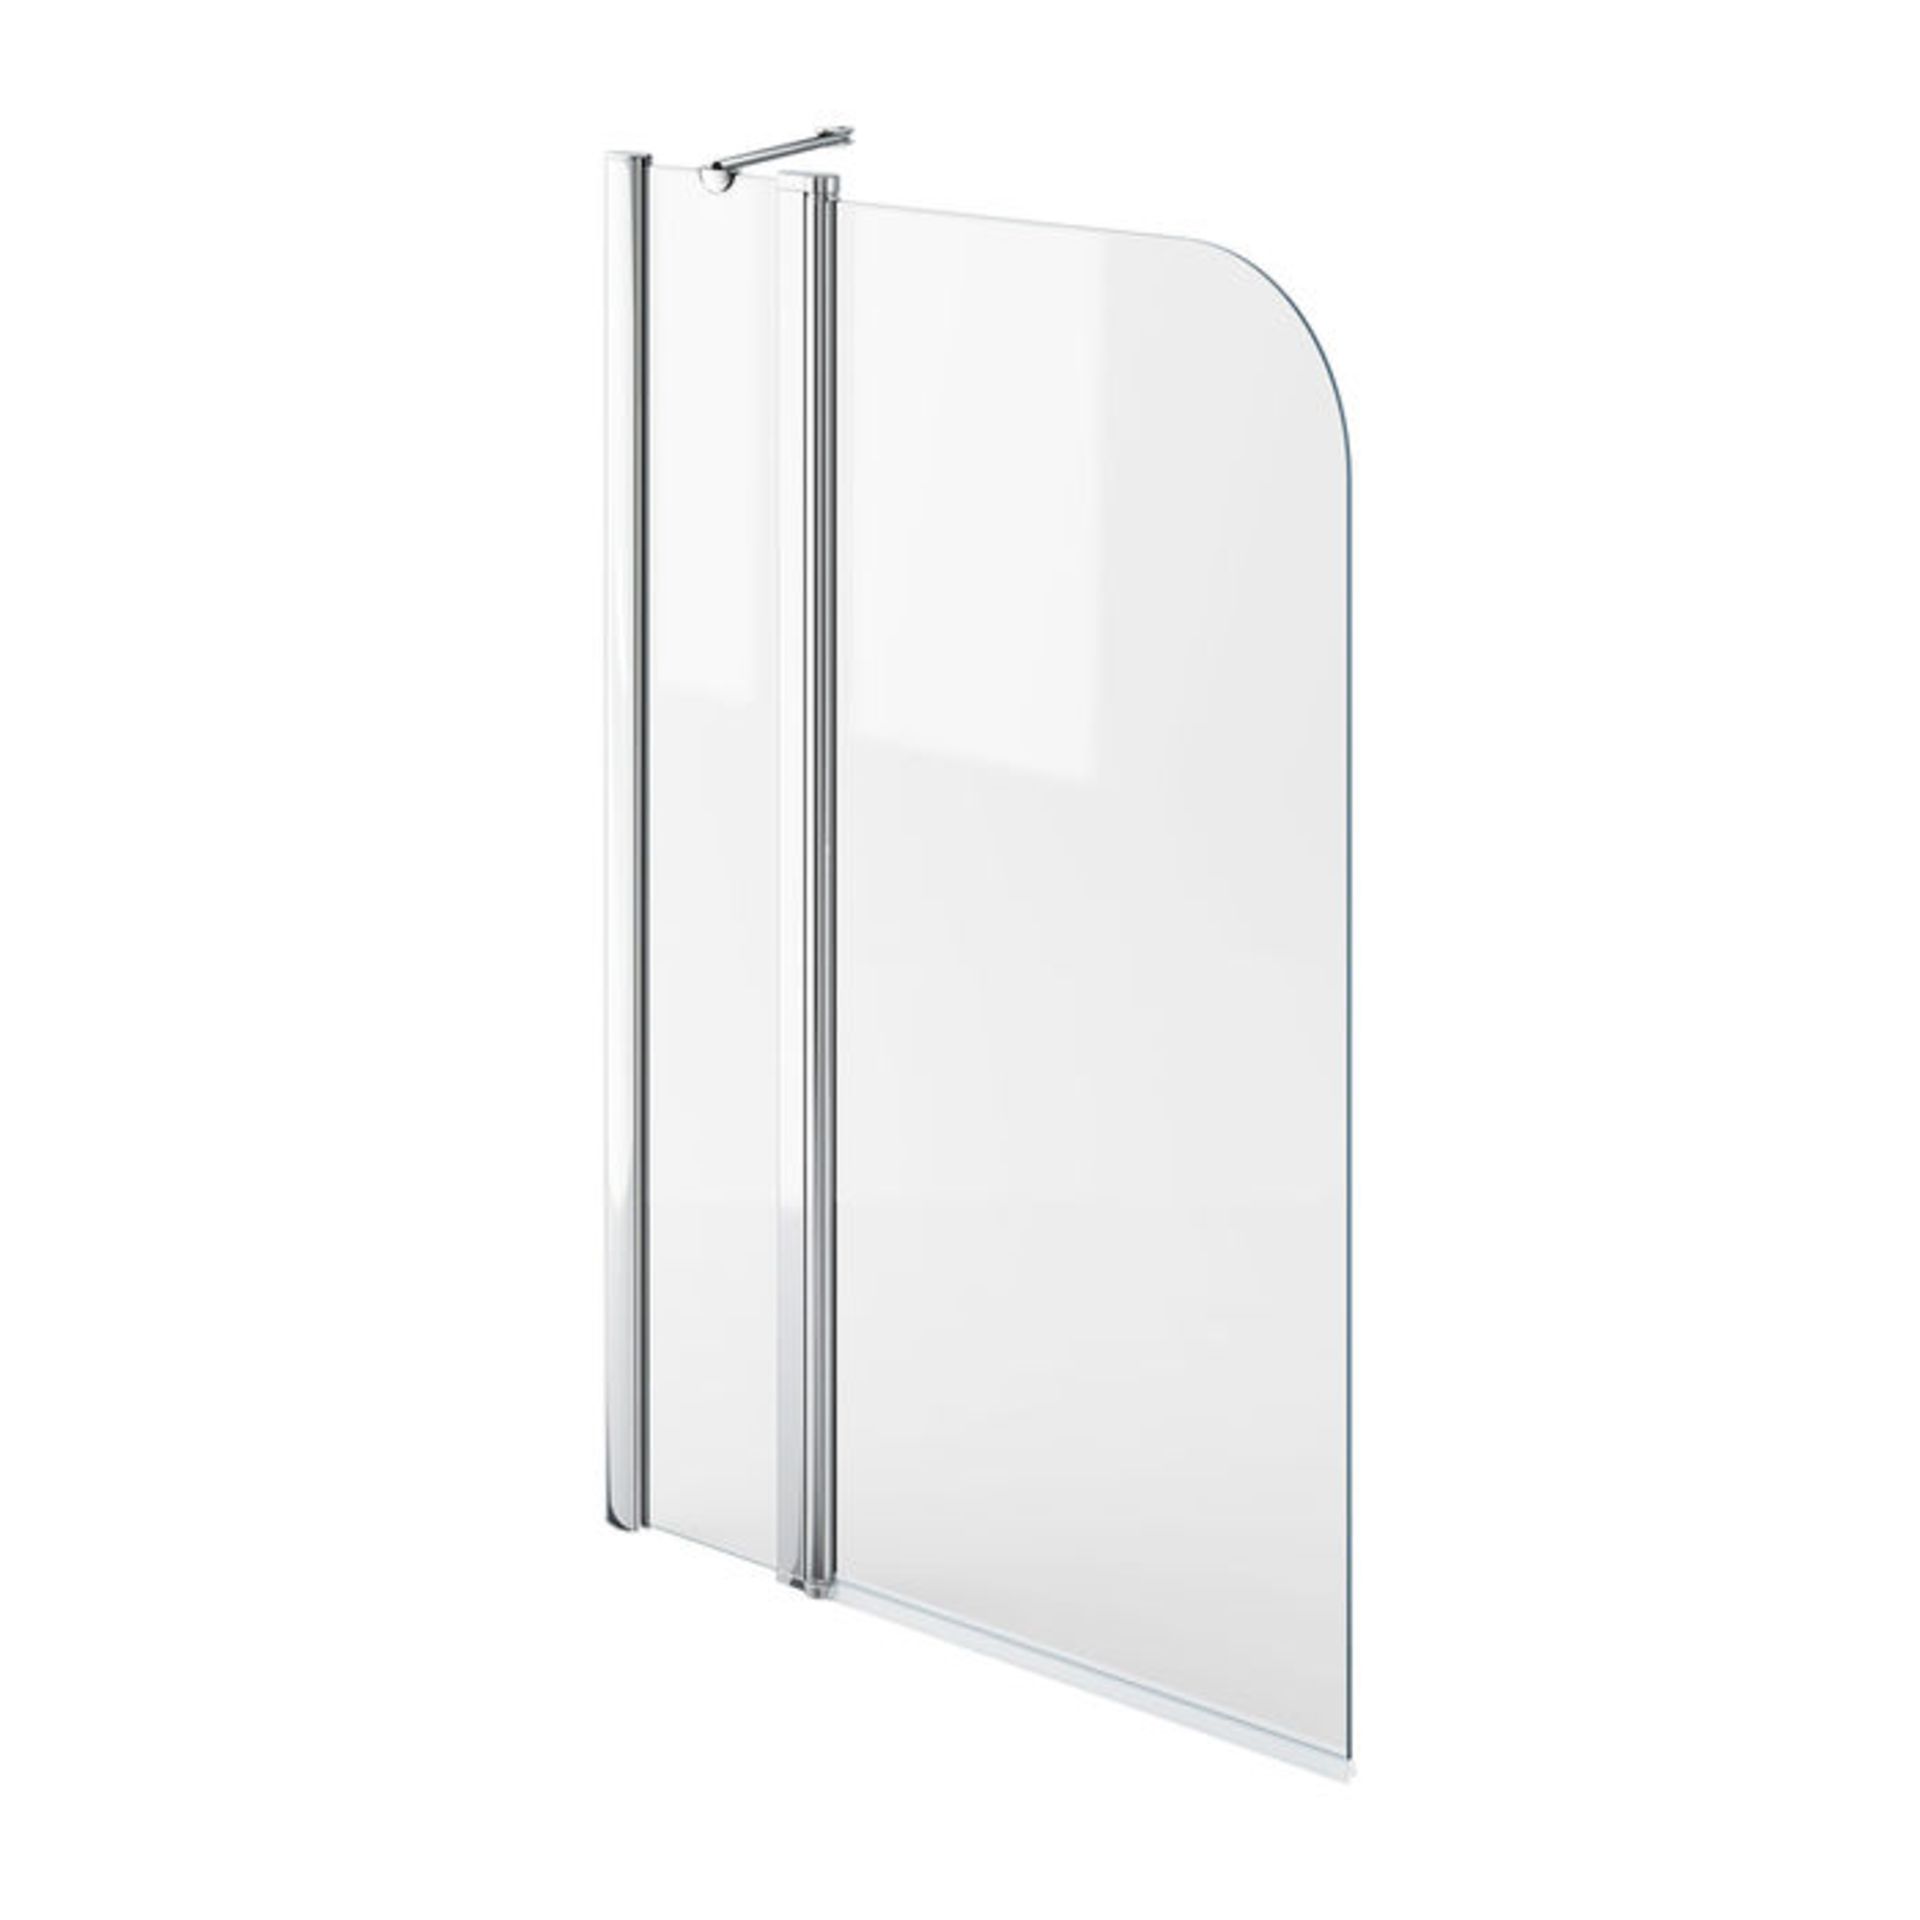 (DK44) 1000mm - 6mm - EasyClean Straight Bath Screen. RRP £224.99. 6mm Tempered Safety Glass - Image 4 of 4